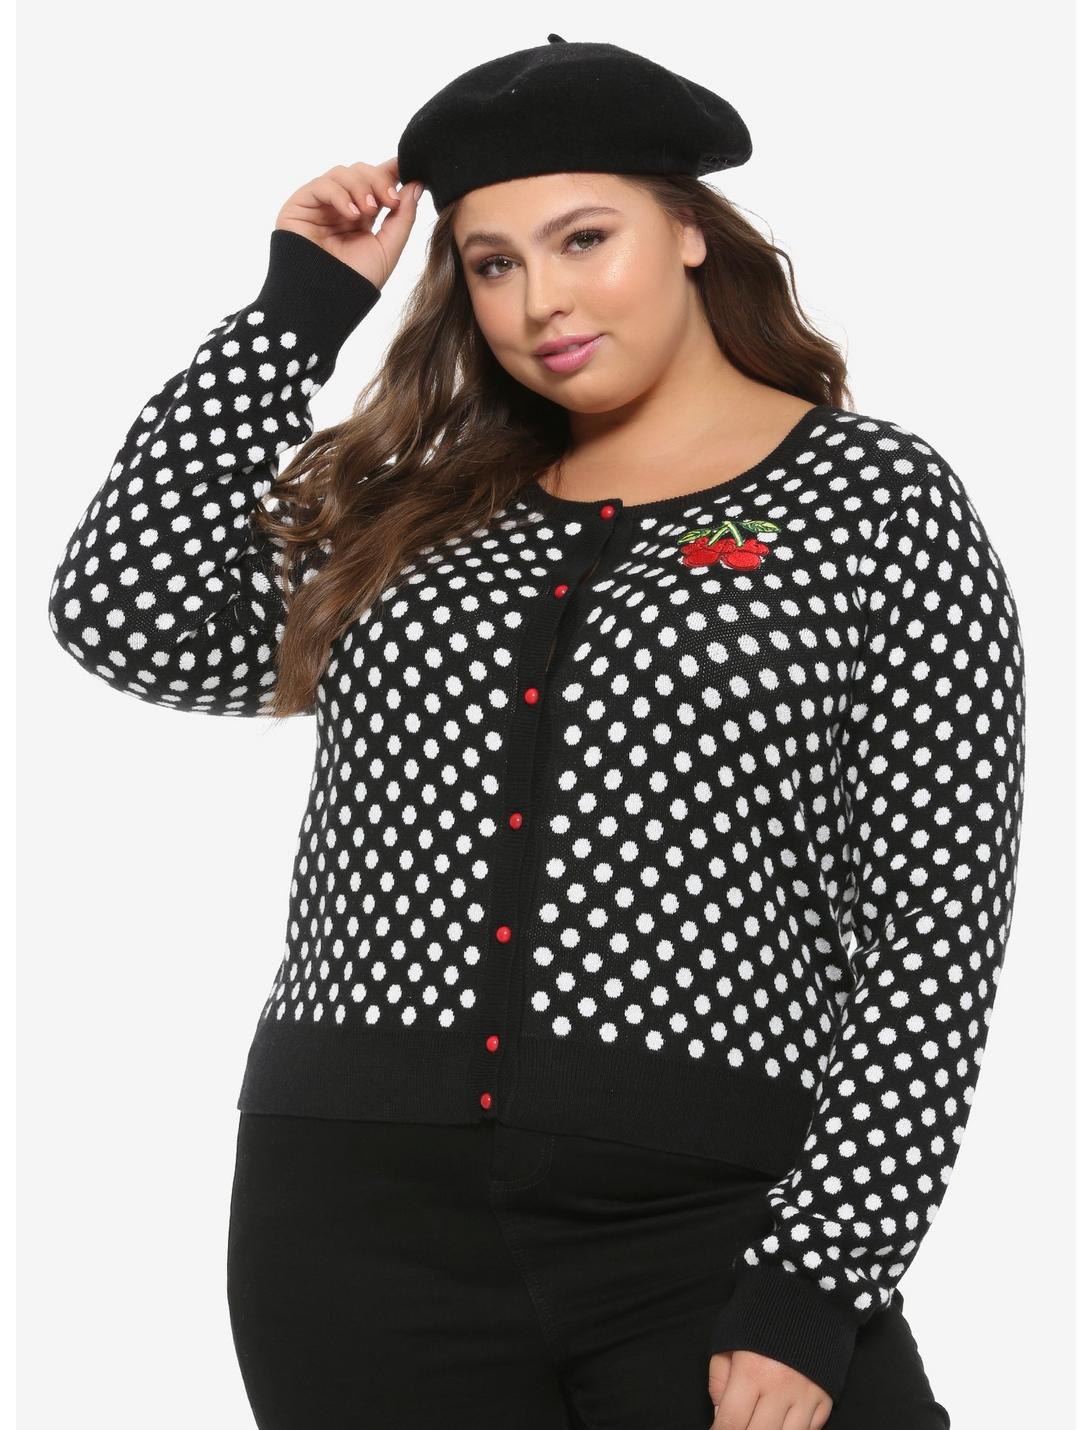 Her Universe Disney Minnie Mouse Polka Dots & Cherries Girls Cardigan Plus Size, RED, hi-res